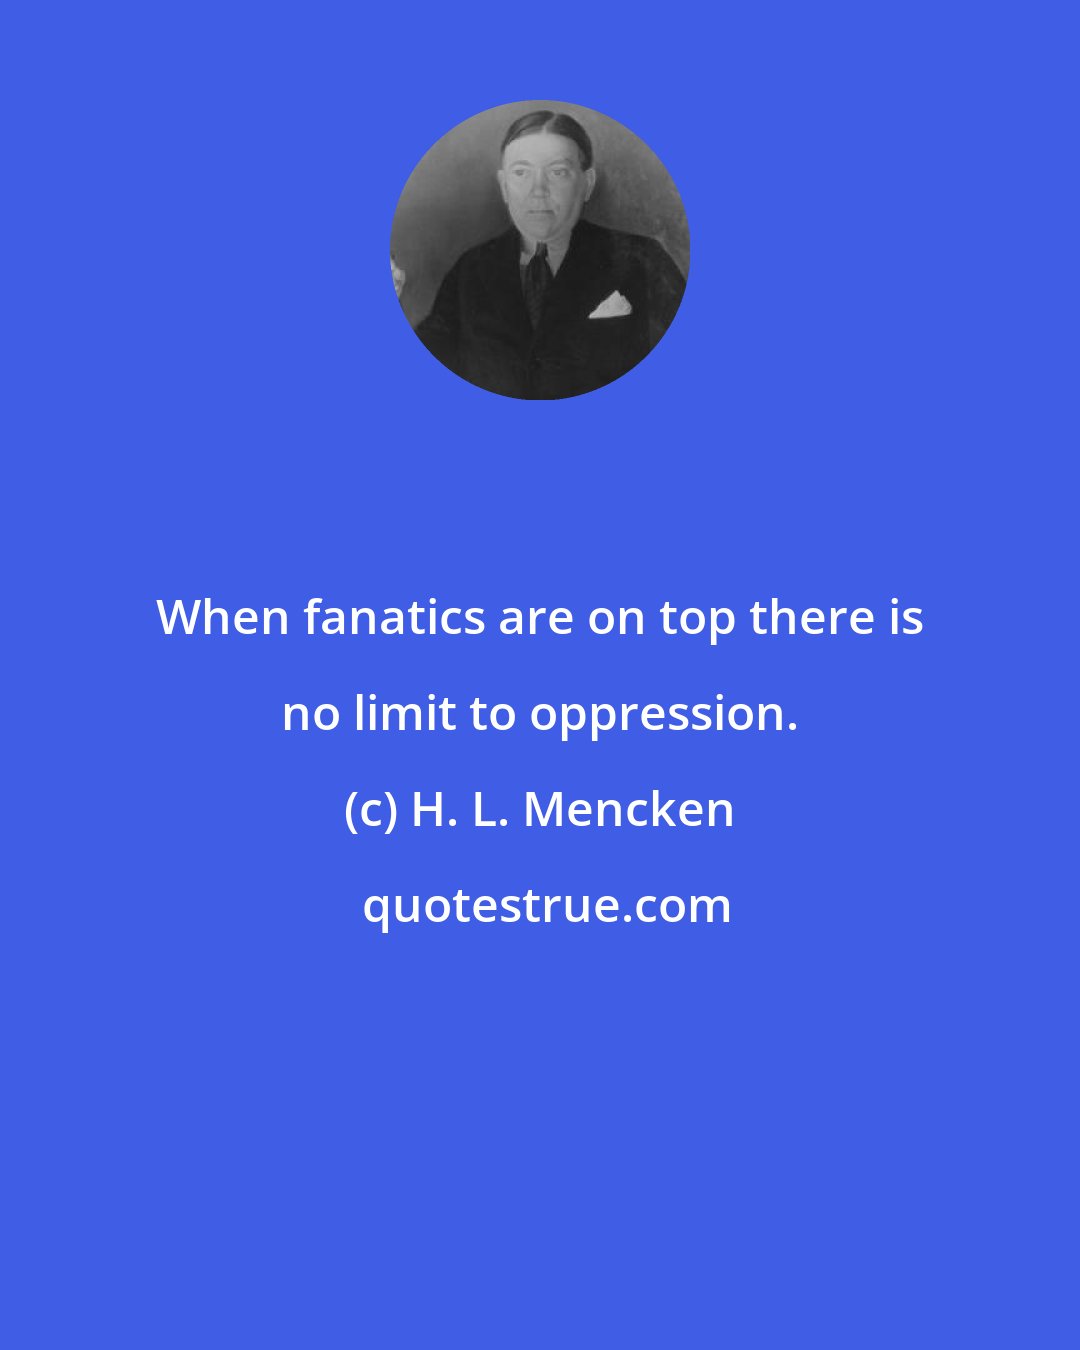 H. L. Mencken: When fanatics are on top there is no limit to oppression.